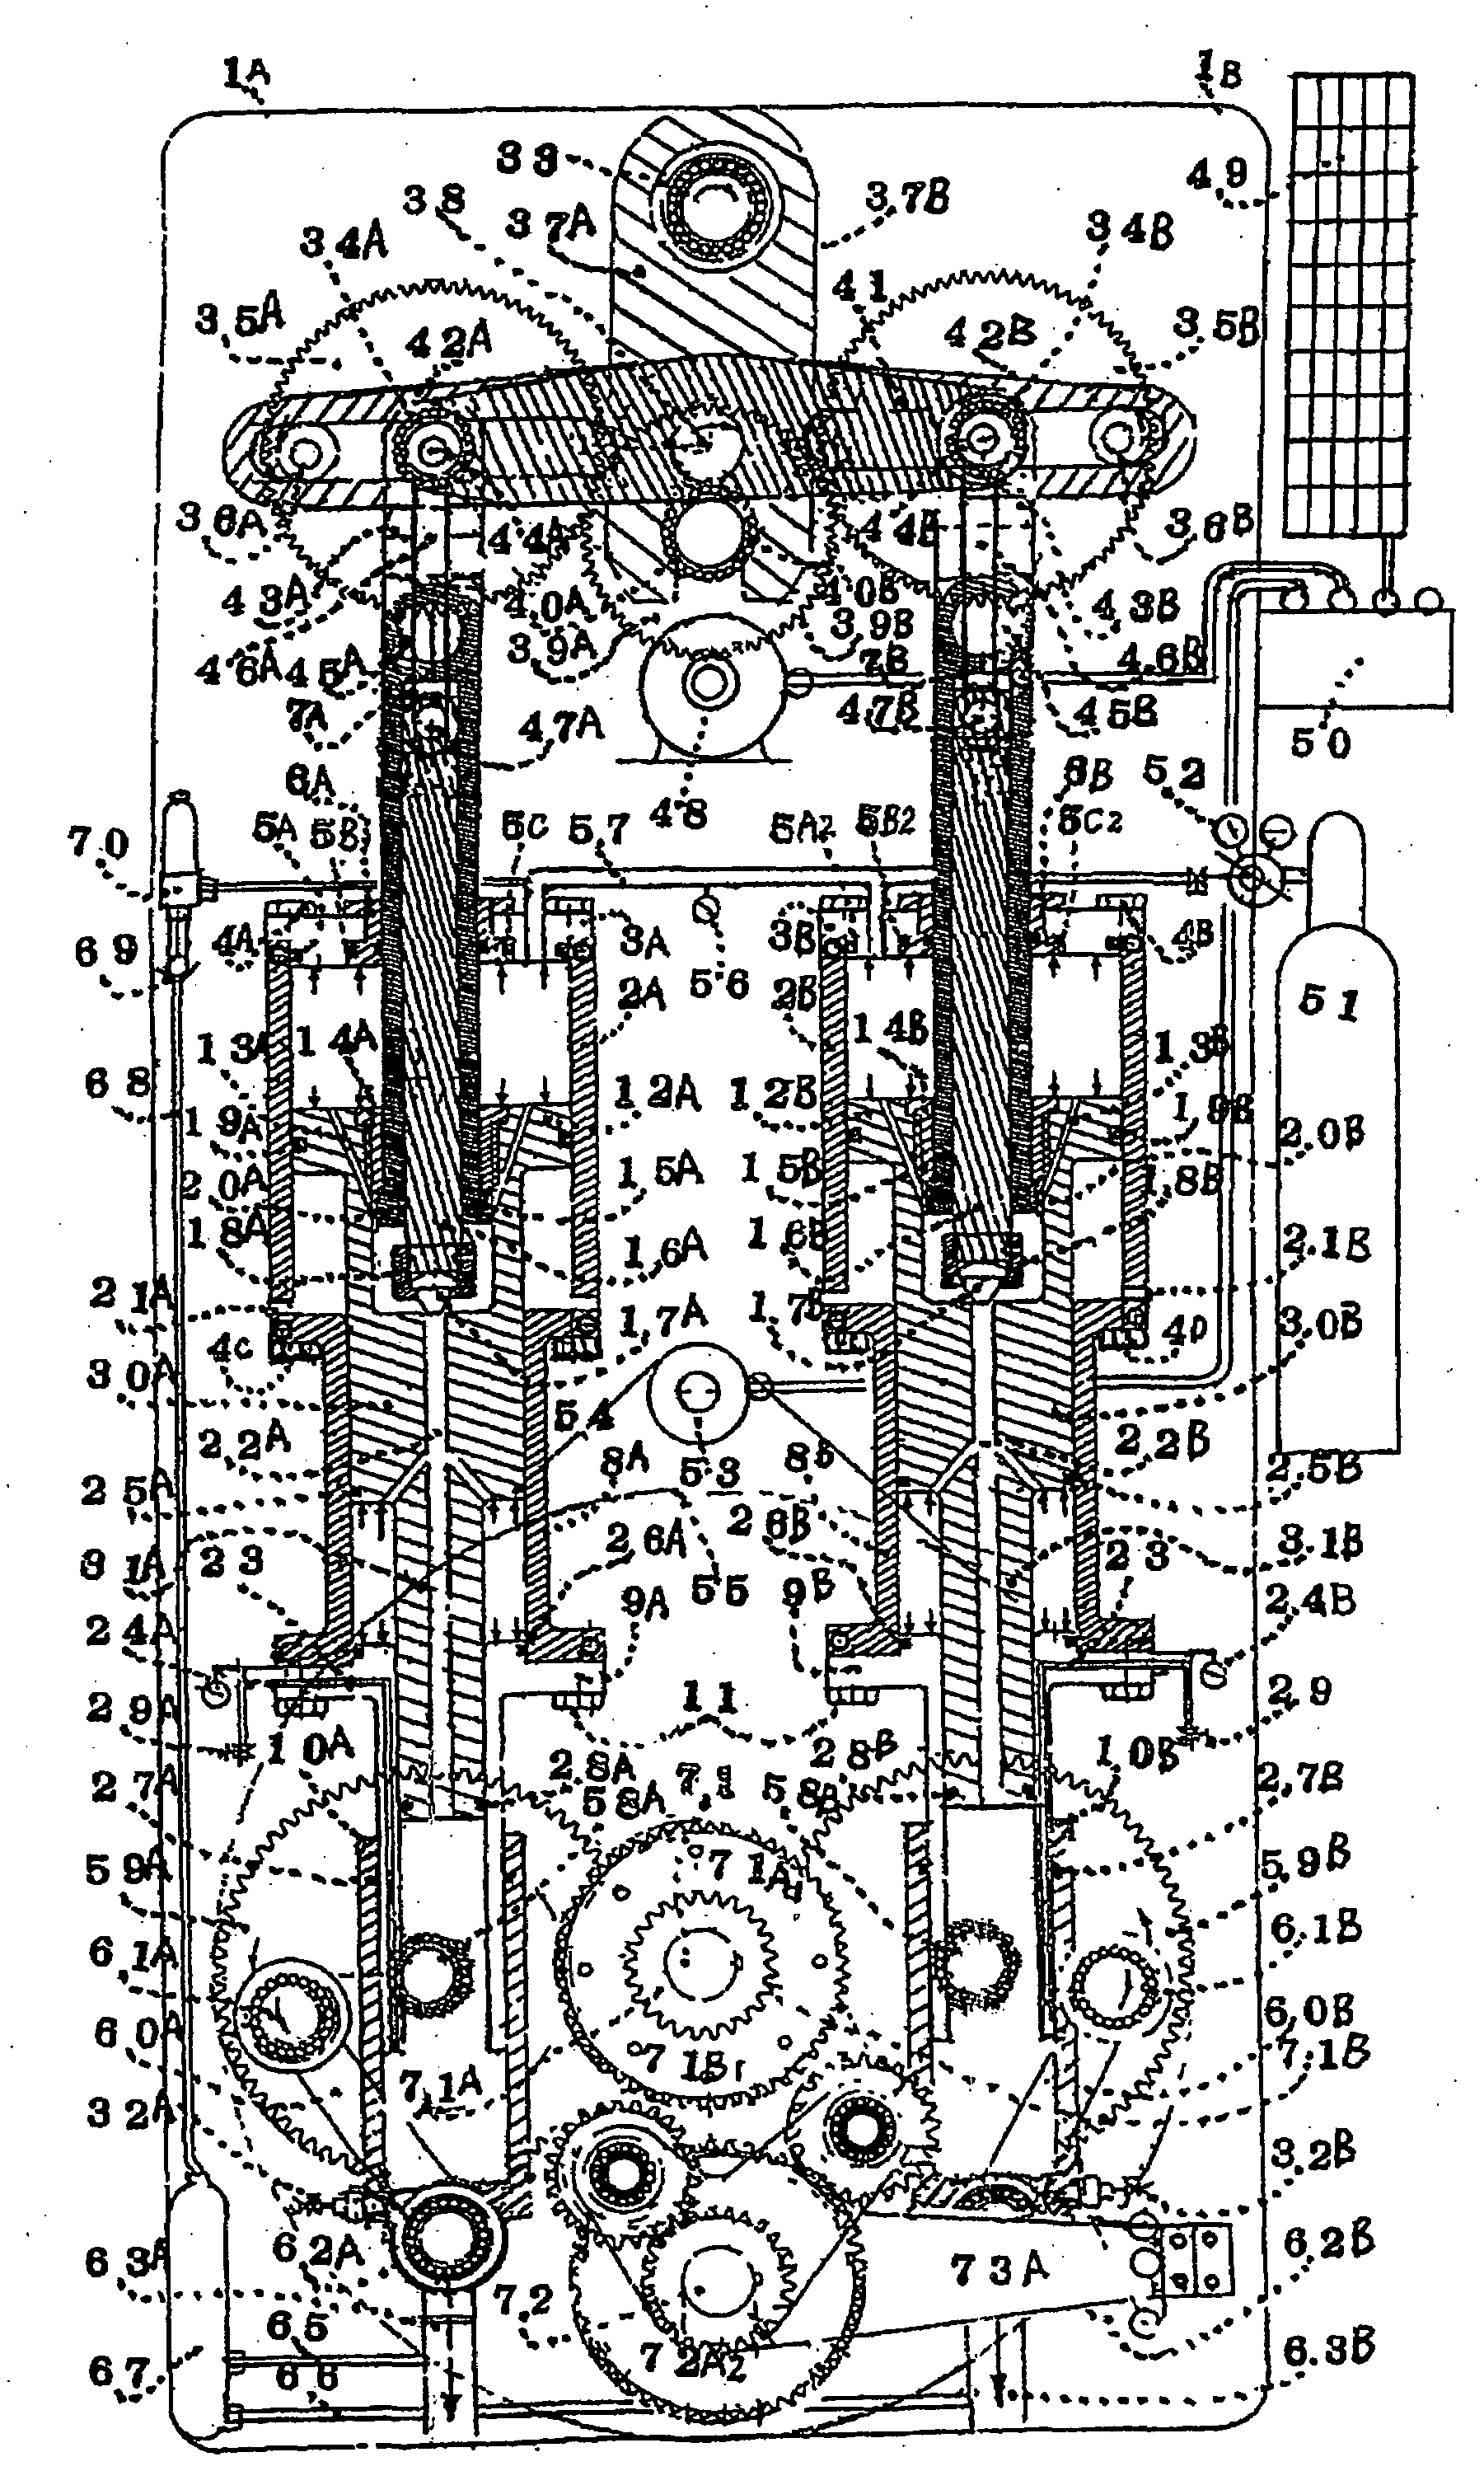 Drive device using charged air pressure